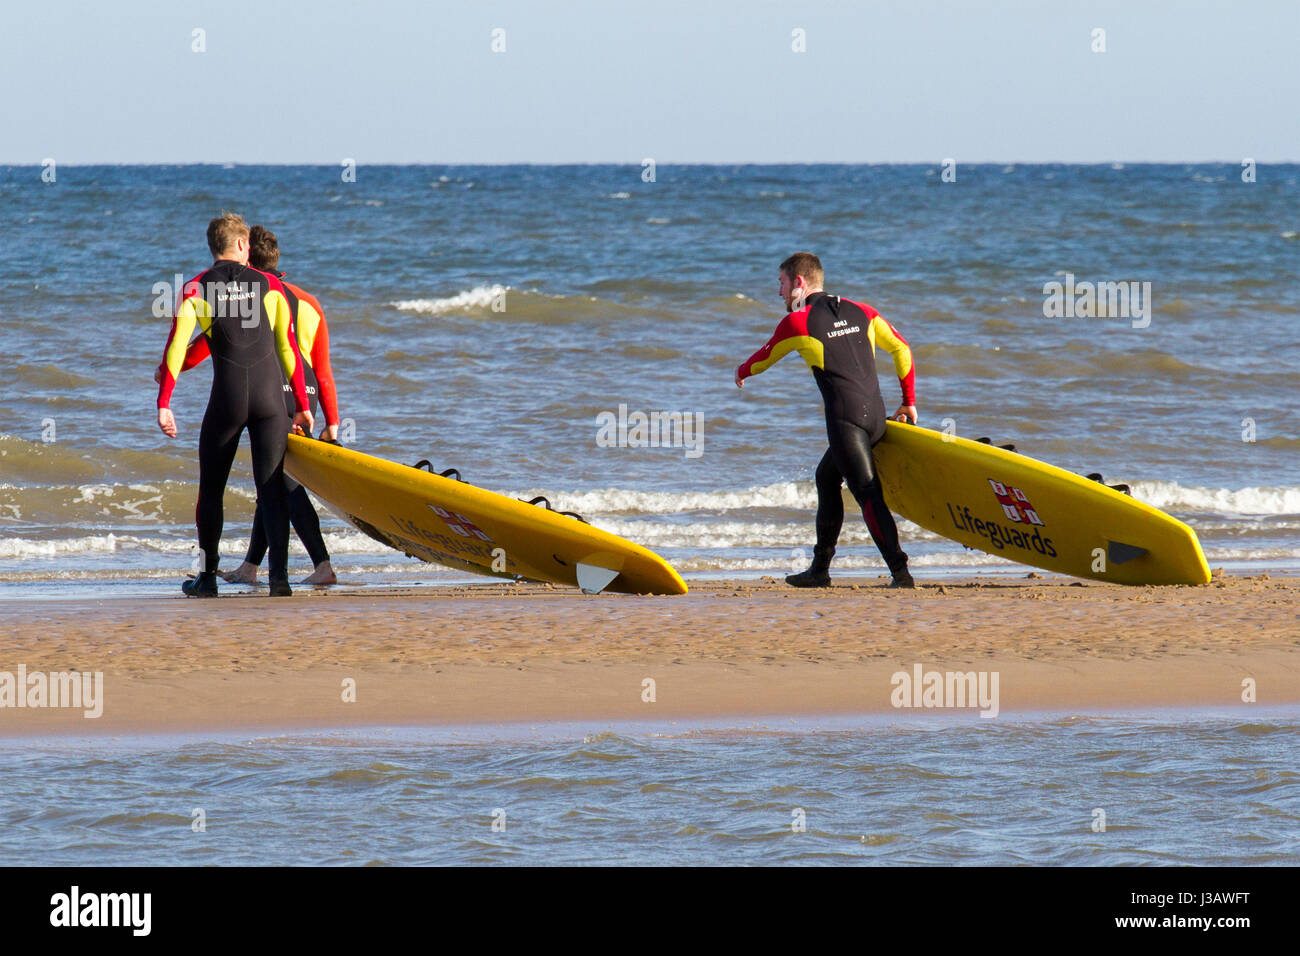 rnli lifeguard sea save rescue rescuer emergency drown drowning water tide tides safety coast swim swimmer swimming guard saver life beach seaside Stock Photo